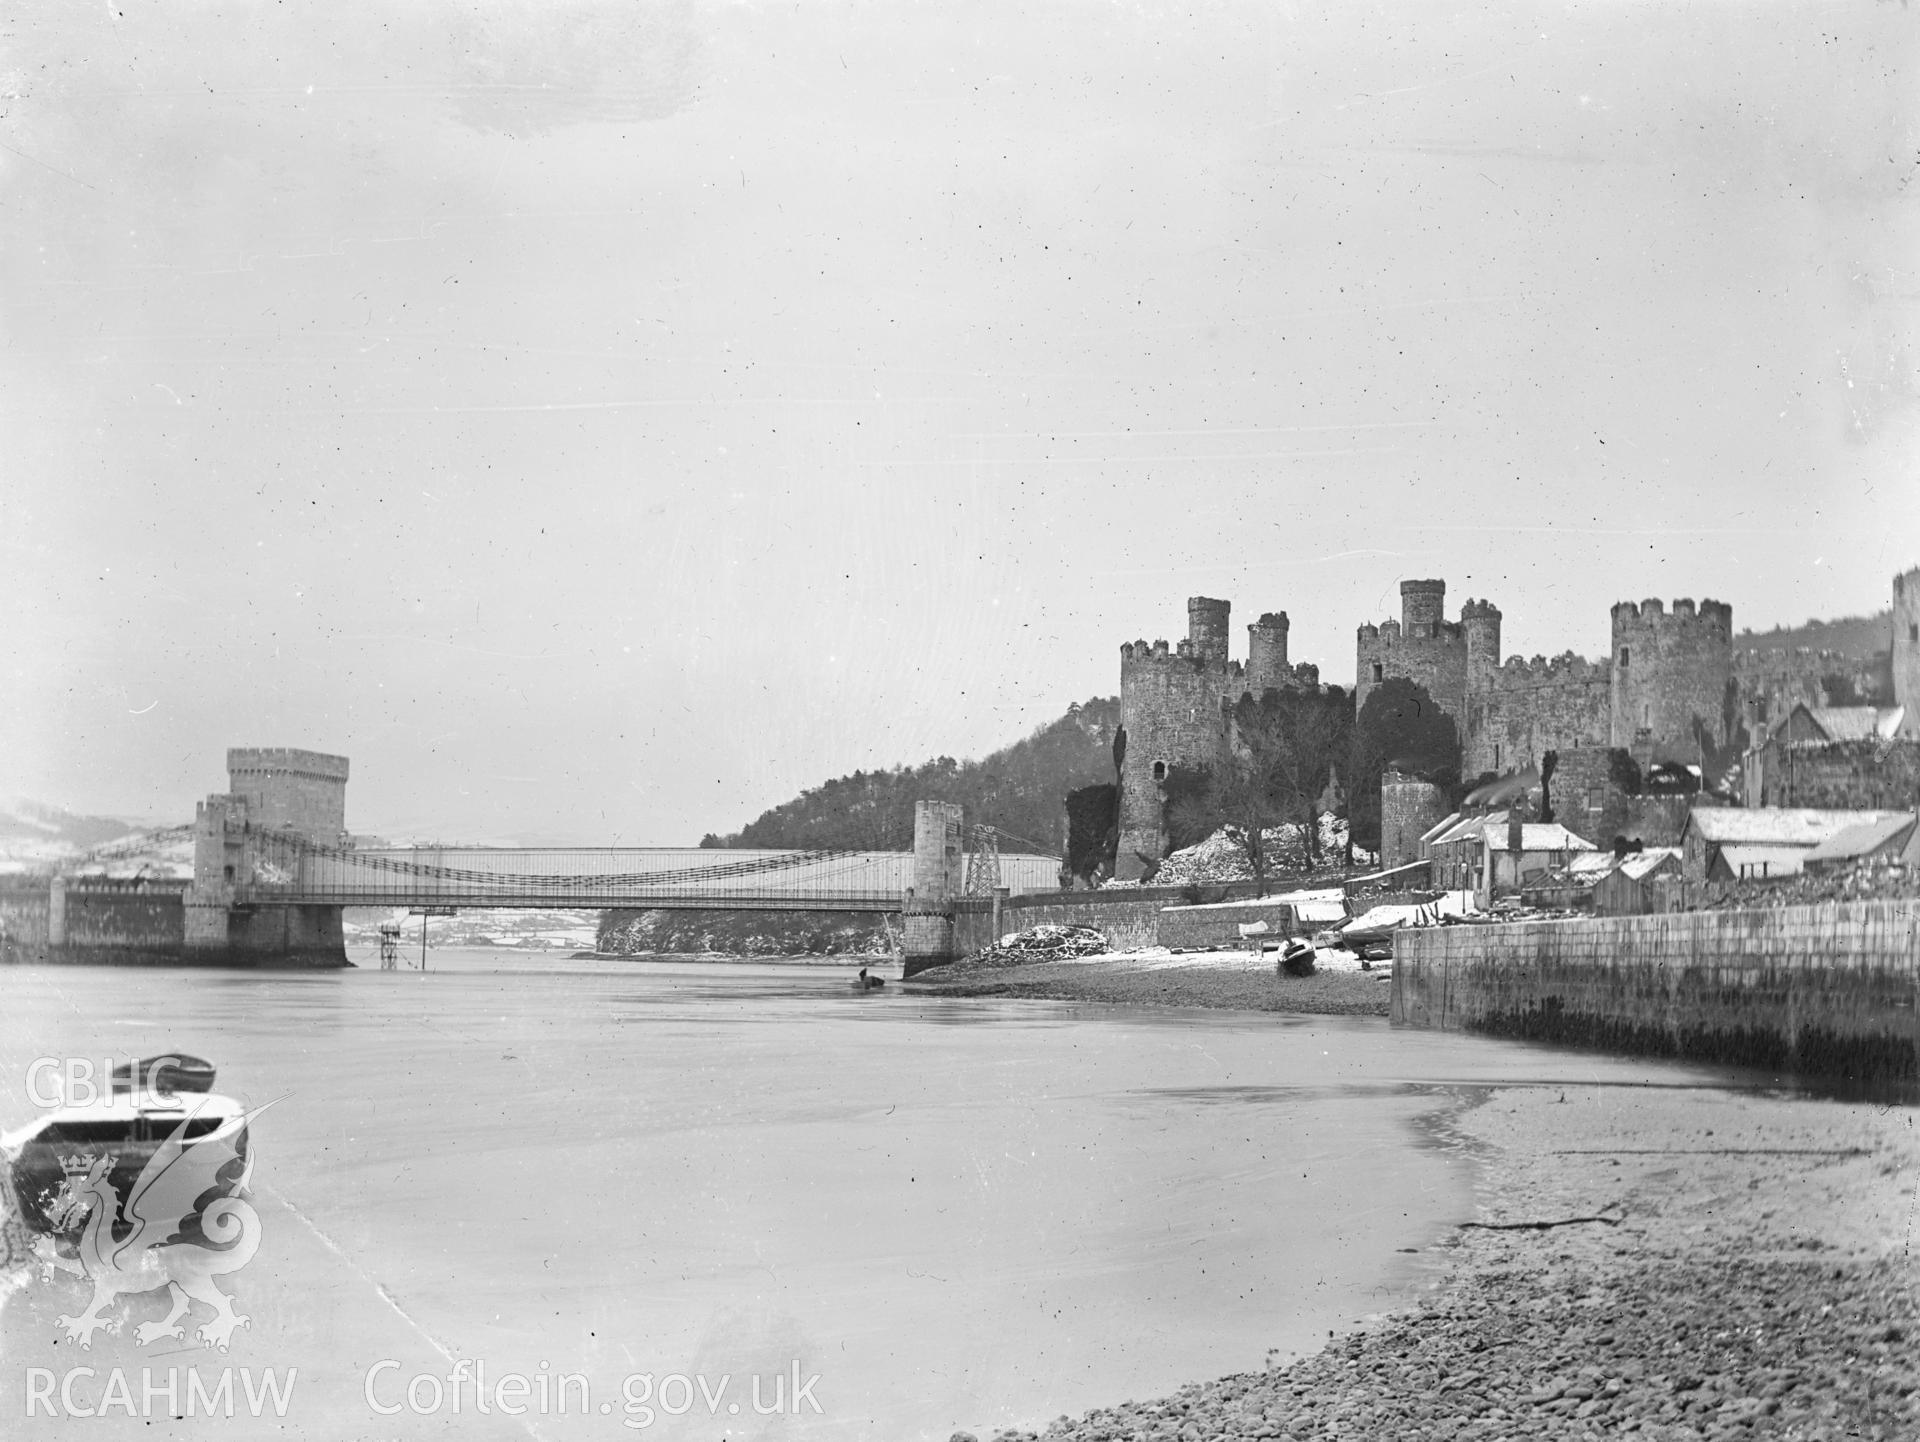 Digital copy of a glass plate showing view of Conwy Castle from the river, taken by Manchester-based amateur photographer A. Rothwell, 1890-1910